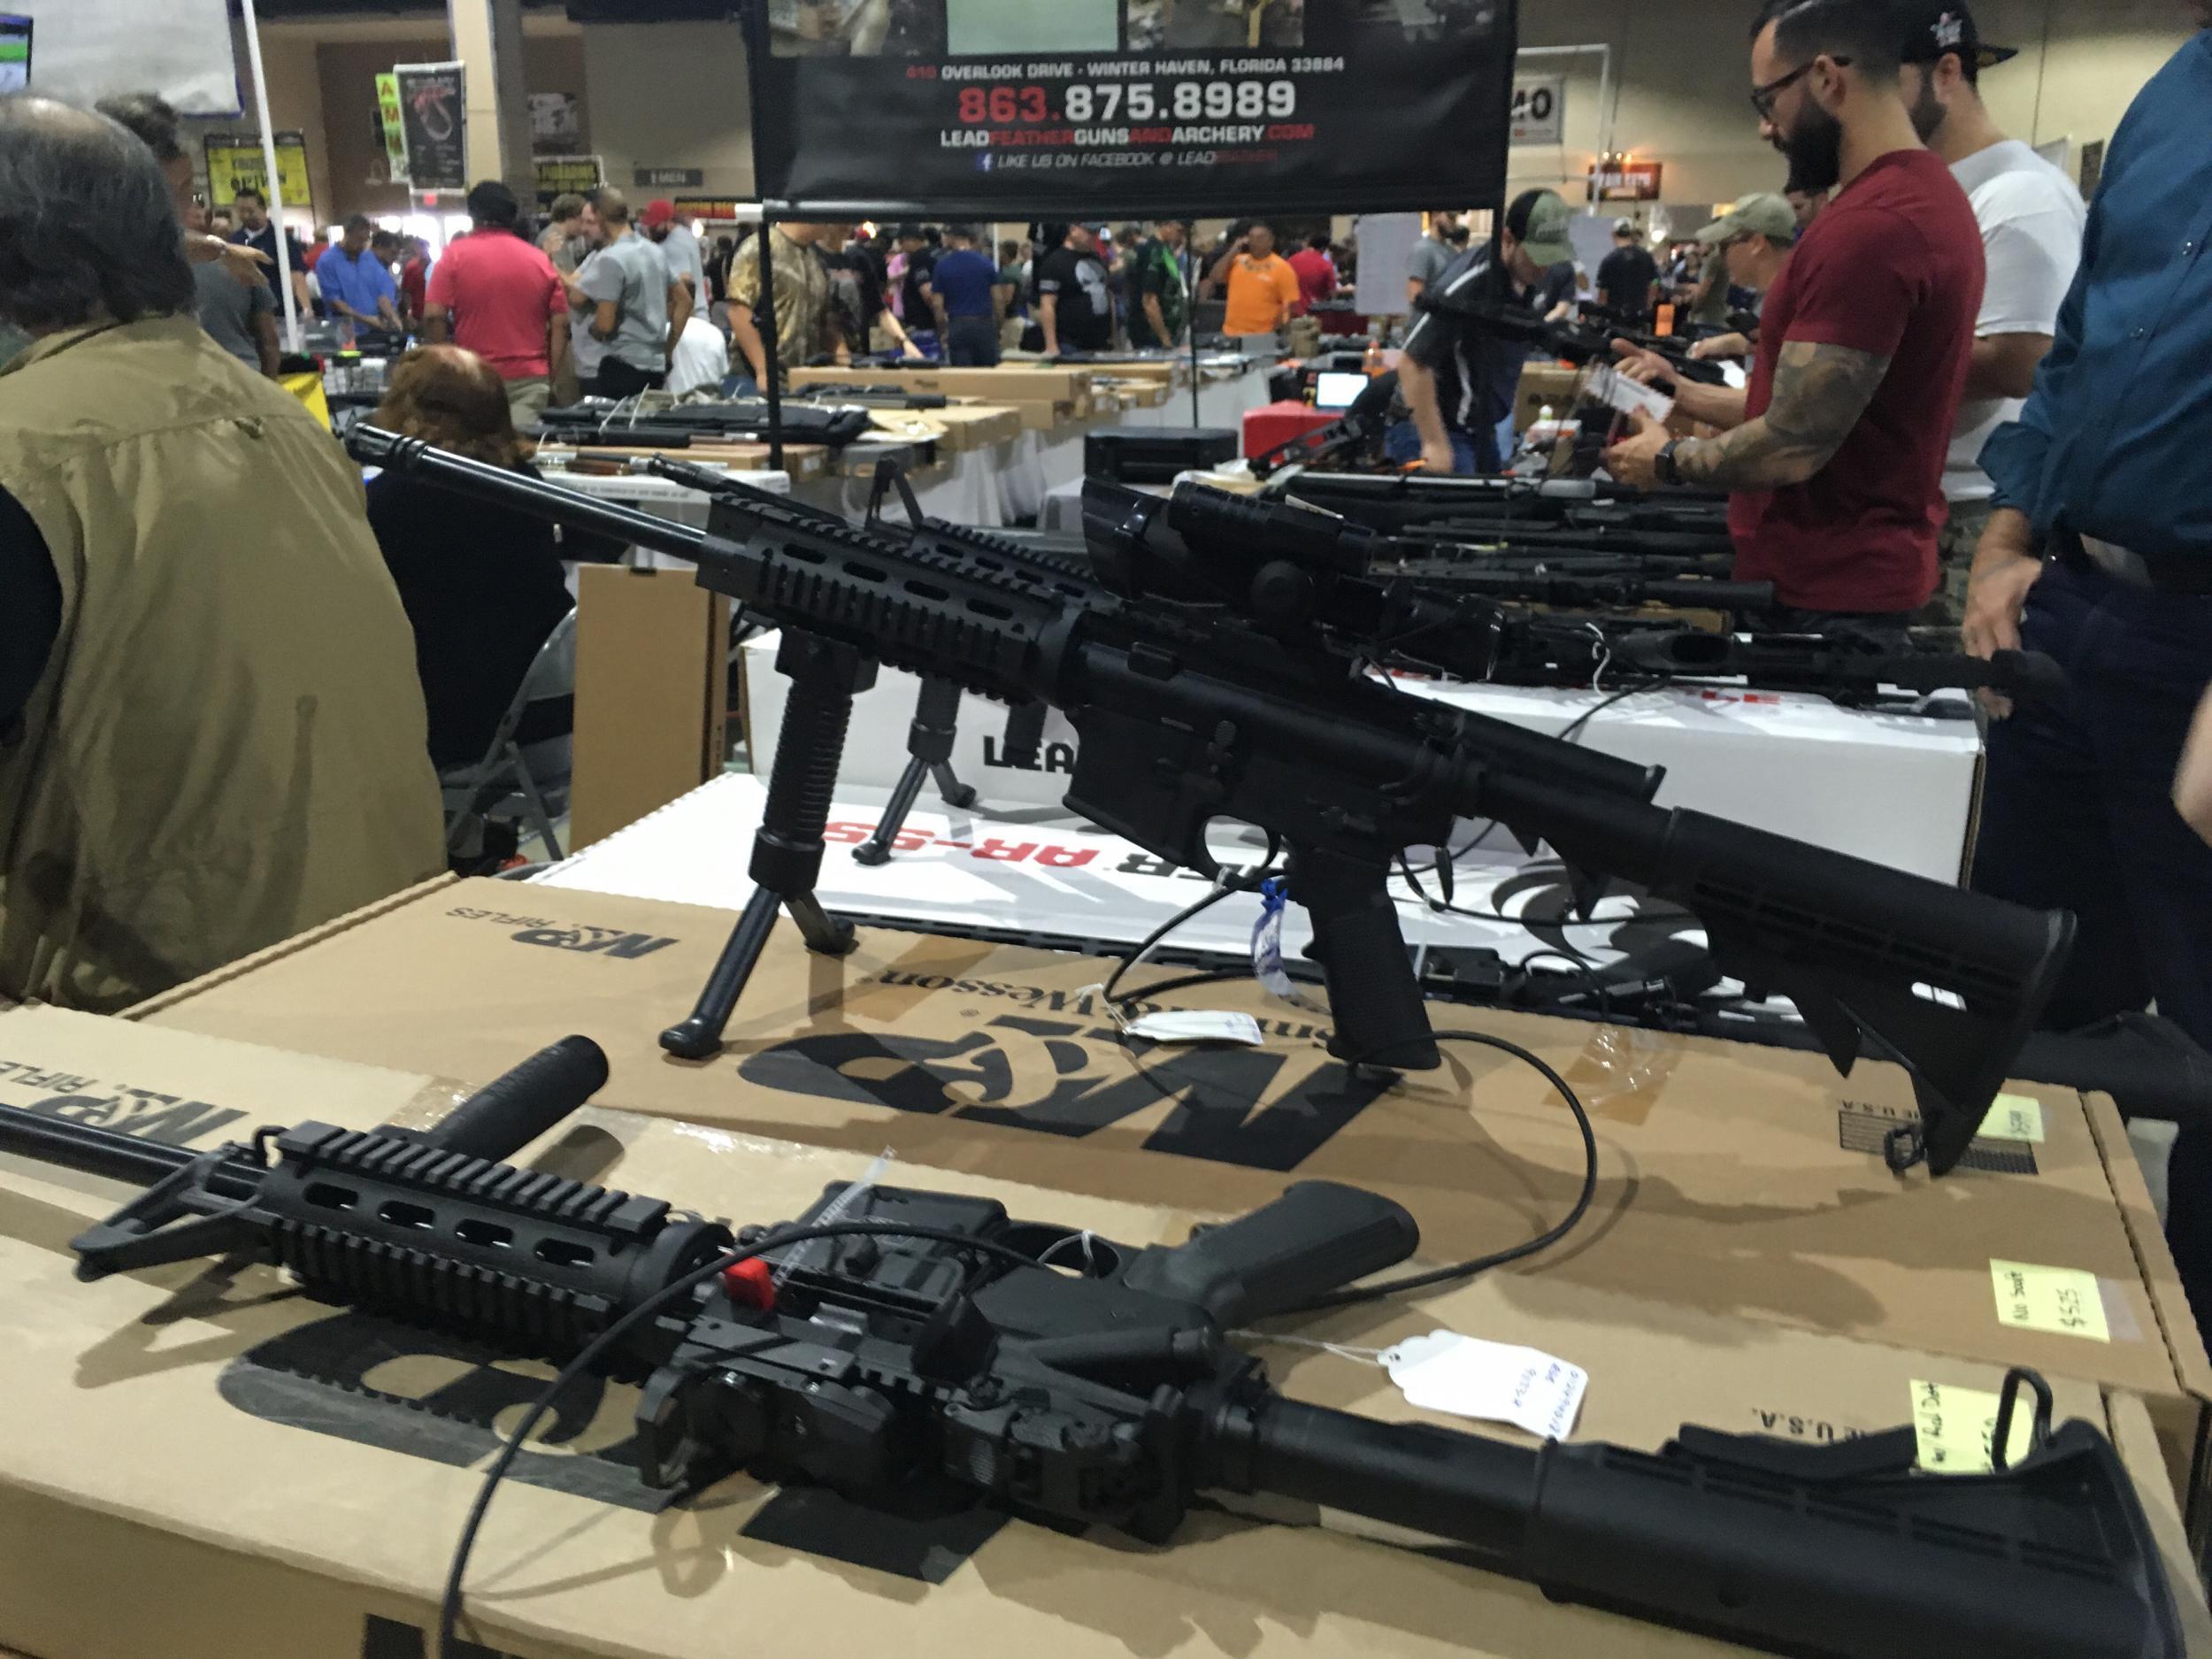 A smorgasbord of weapons were on display at the Miami show